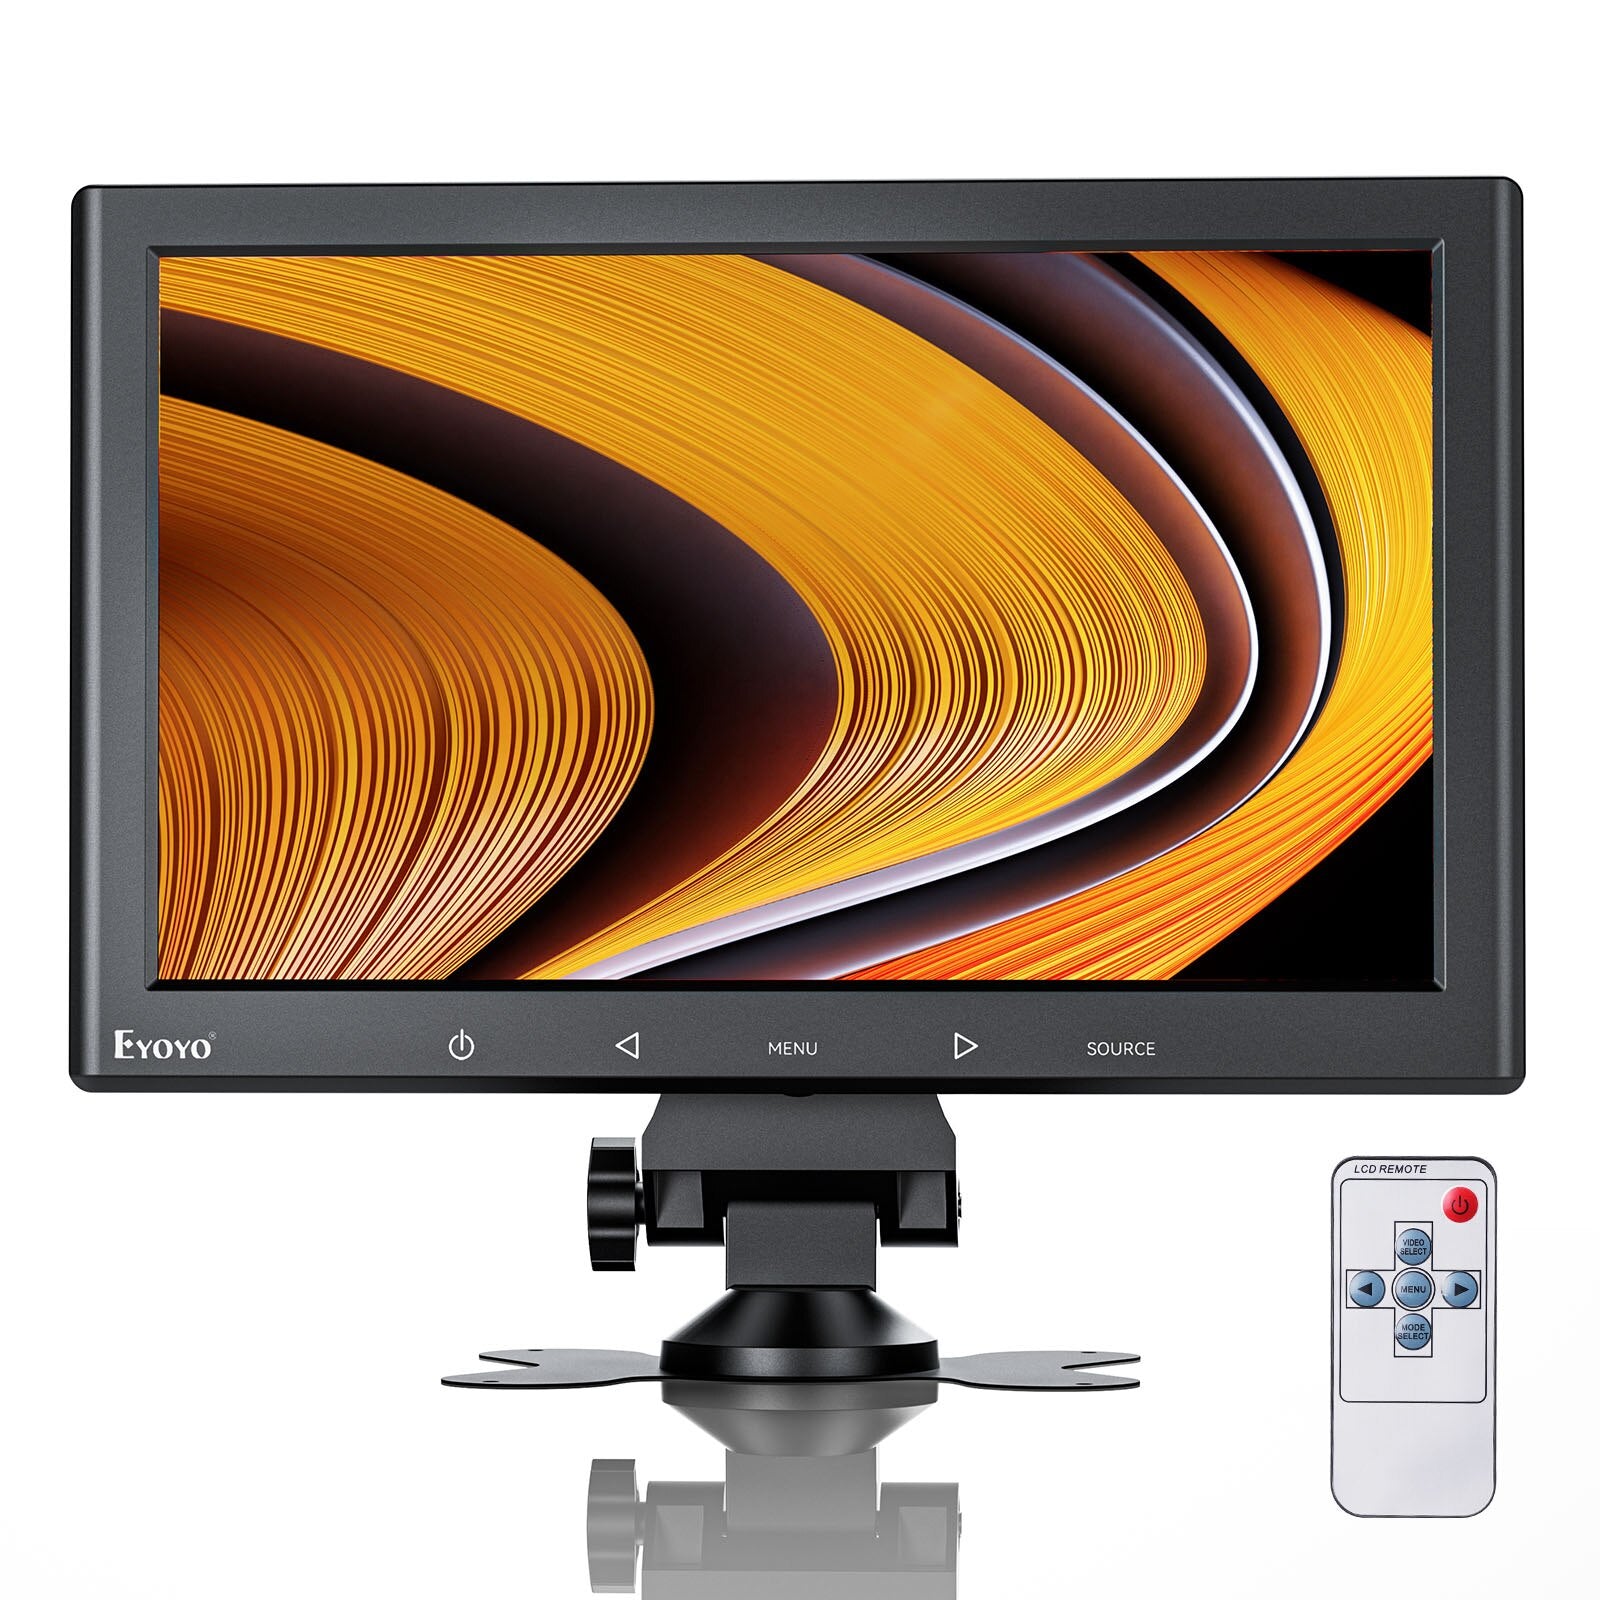 Eyoyo 10/7 Inch HDMI Monitor with Sensitive Touch Buttons & Speaker & Remote Controller HD 1024x600 IPS Screen DC 12V/USB  Power